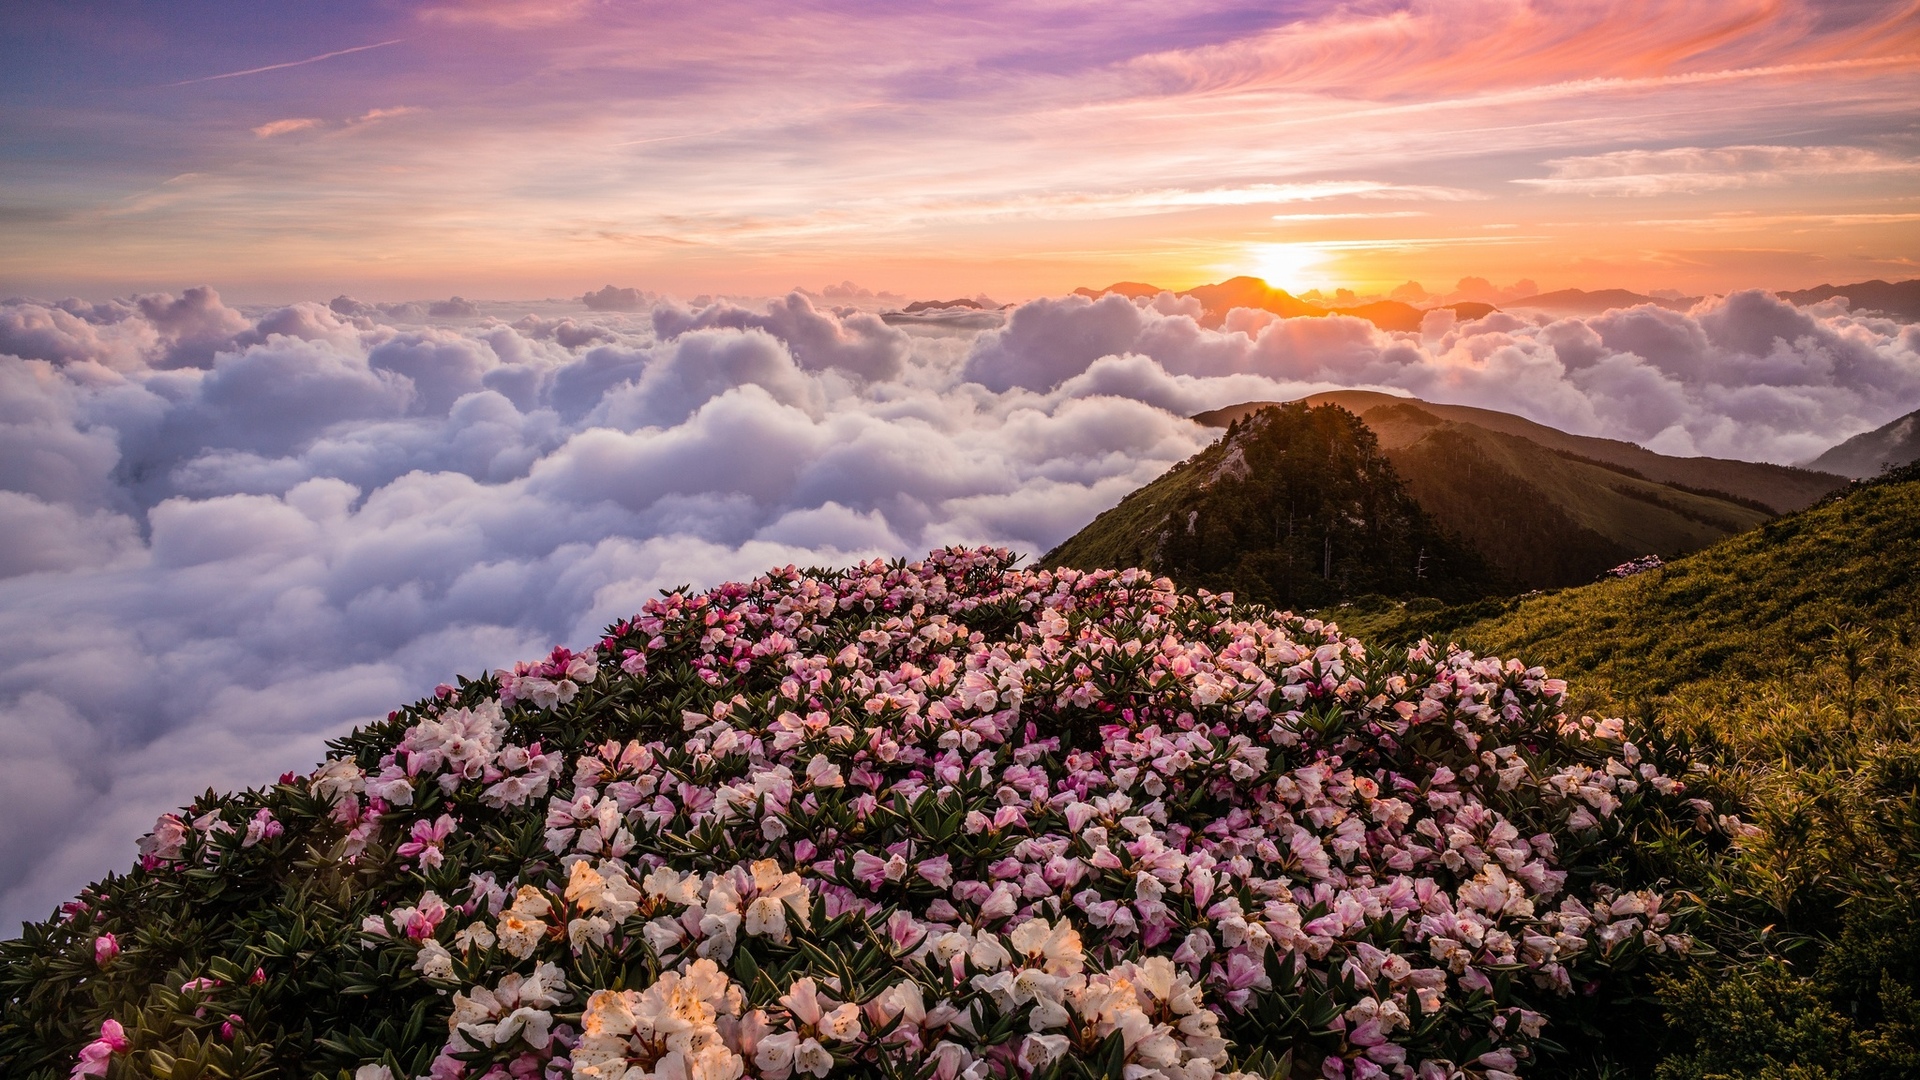 Mountain Flowers In The Clouds Hd Wallpaper Background Image